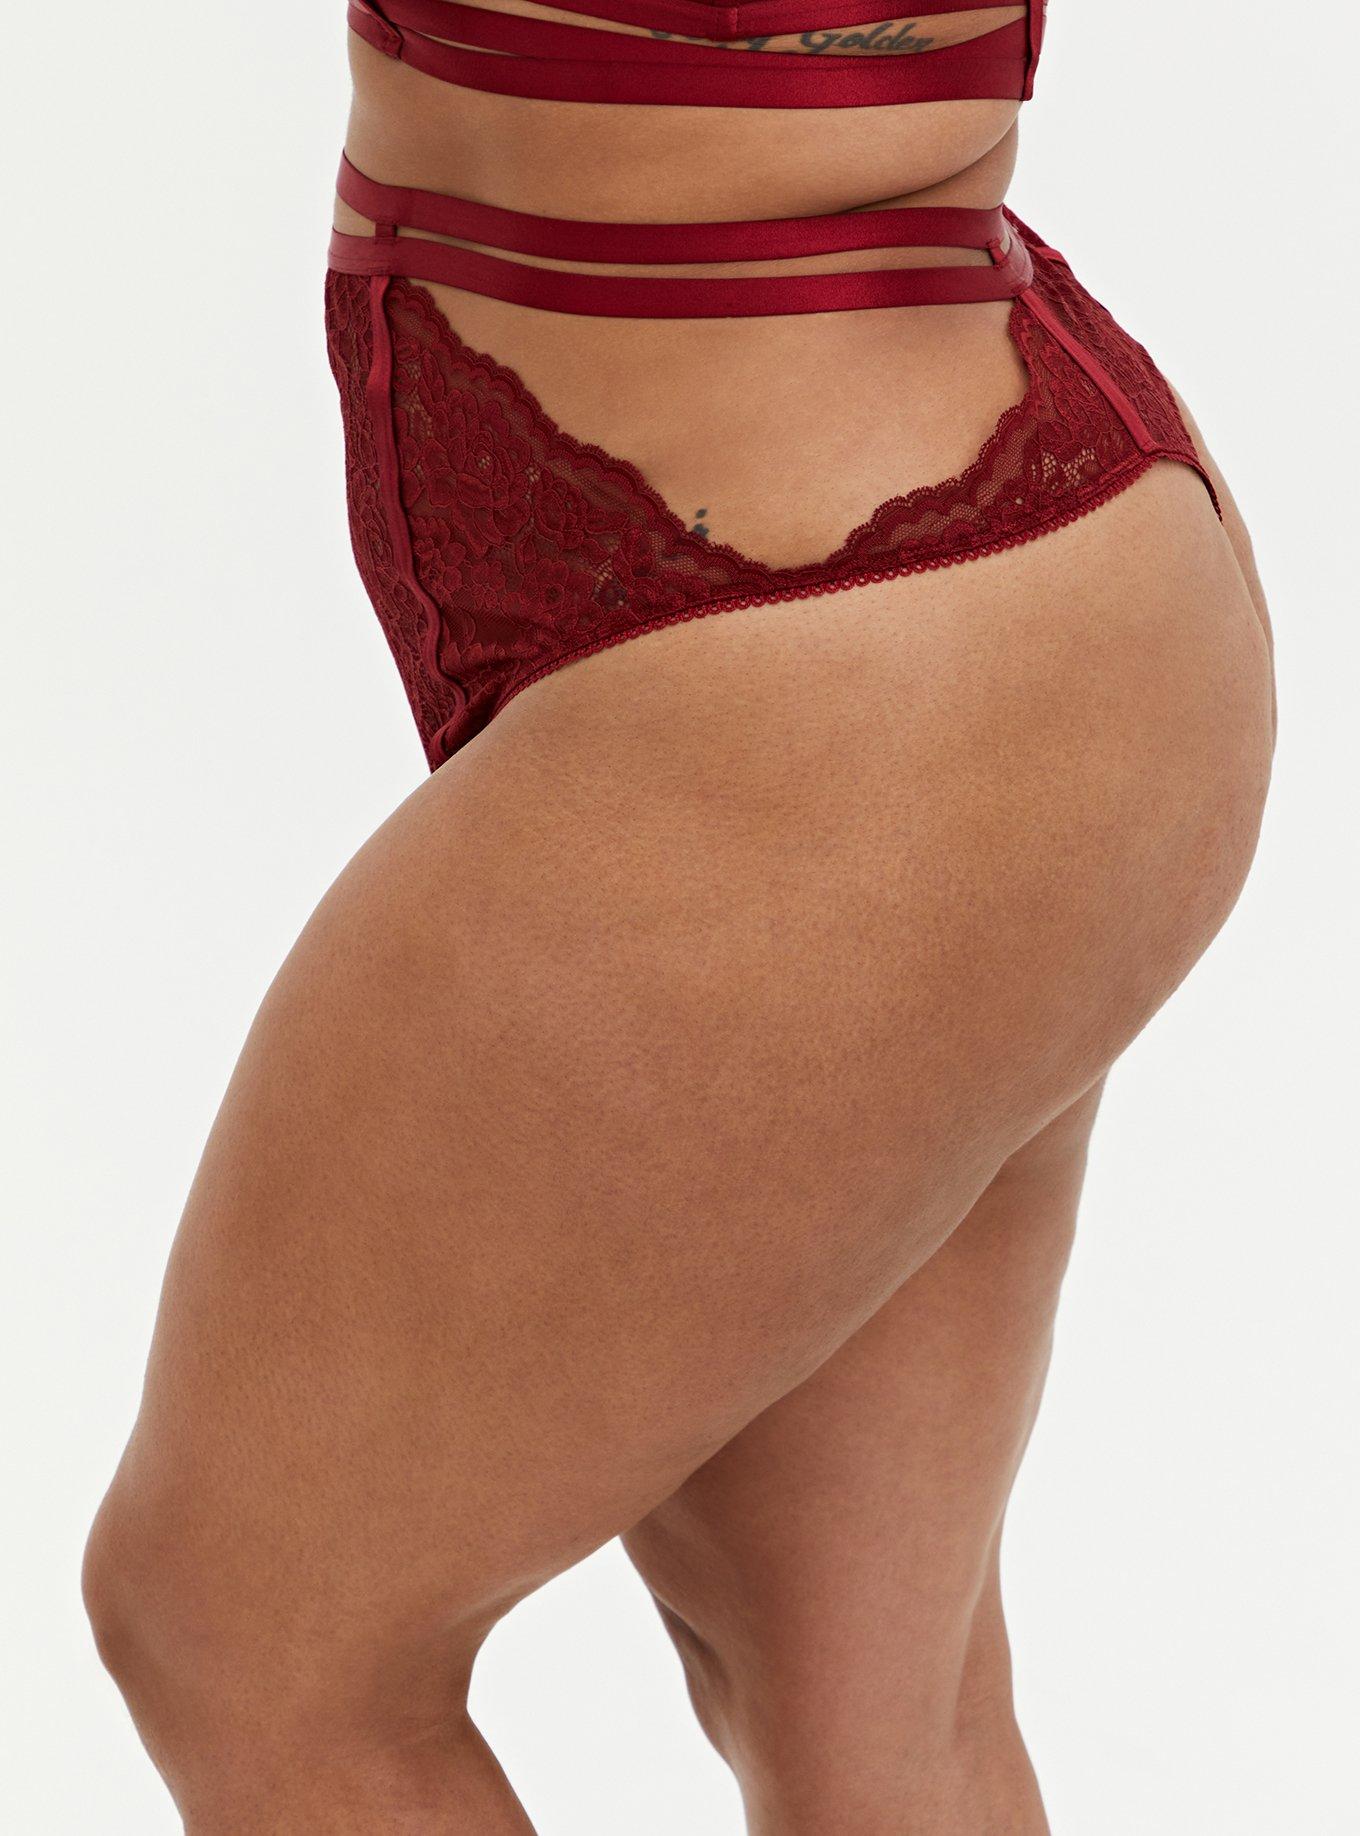 NWT TORRID CURVE SIZE 4X DARK RED LACE CUTOUT CAGE HIGH WAIST THONG PANTY